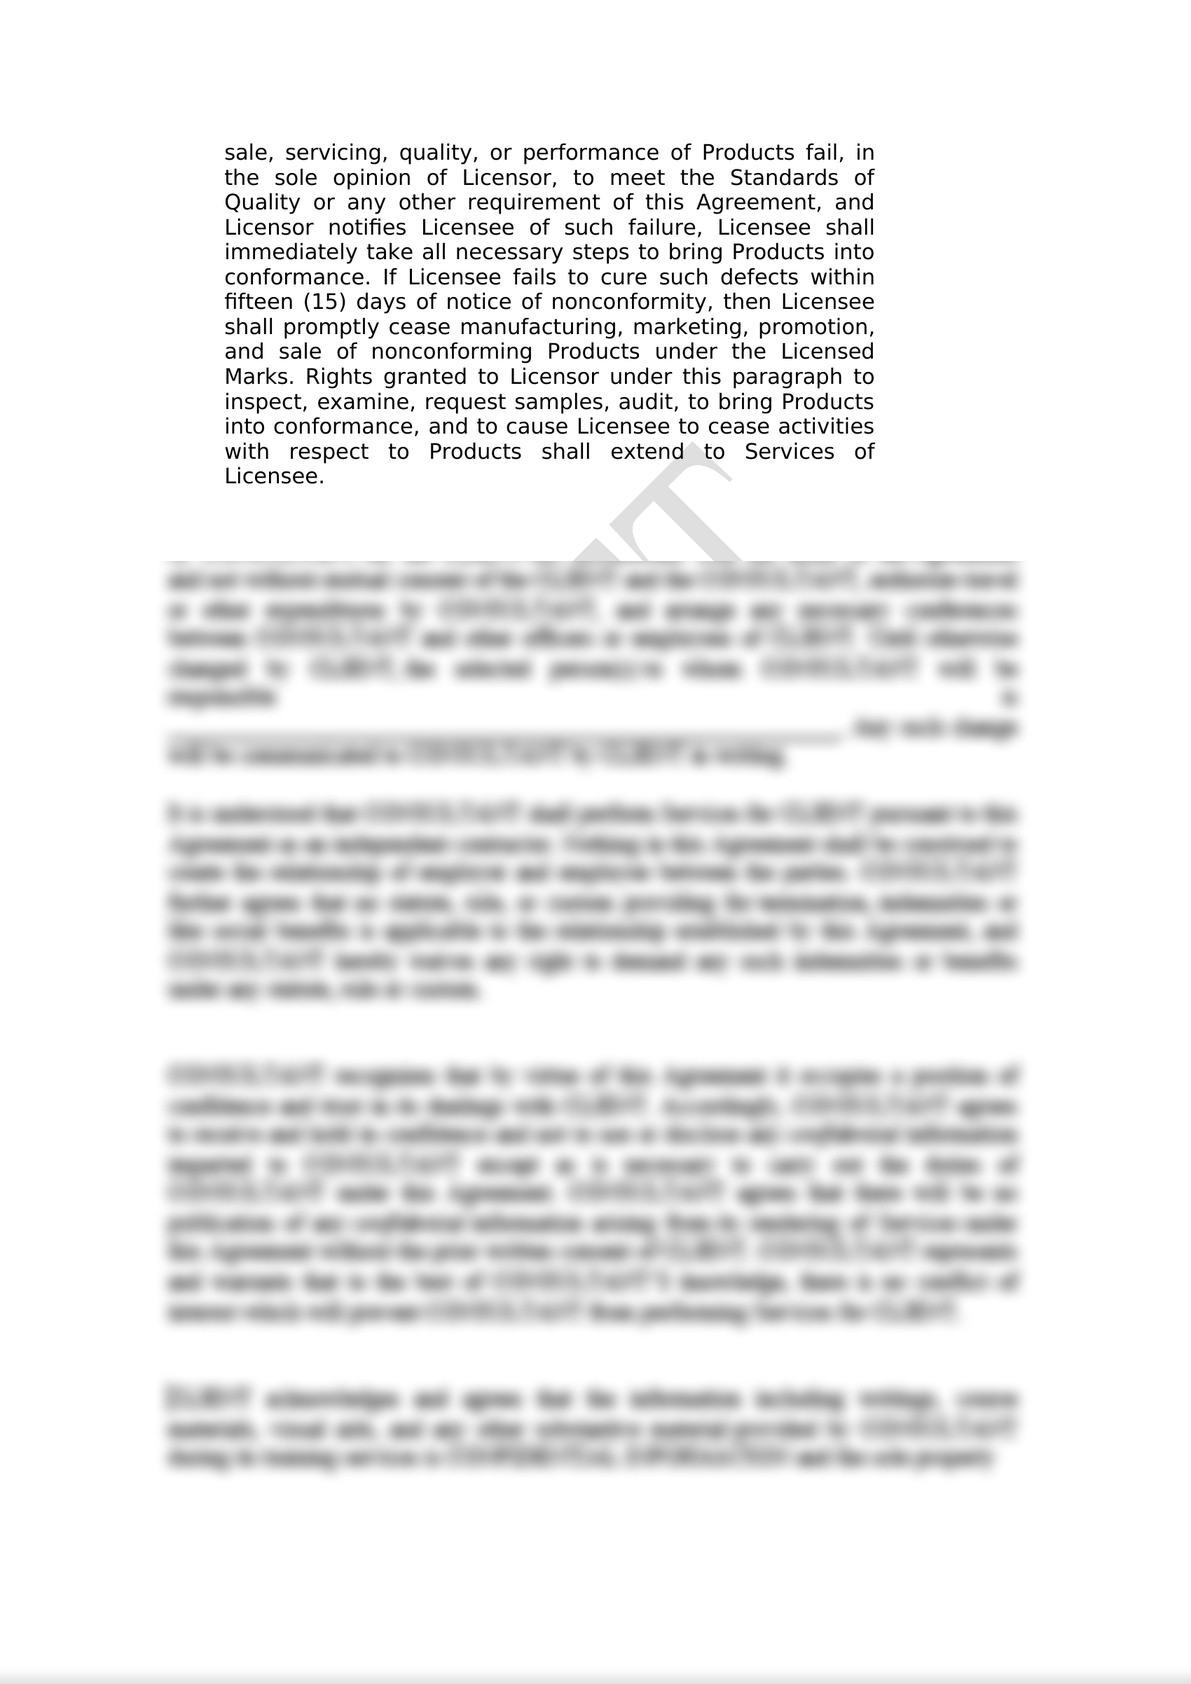 Inter-Company Intellectual Property Licensing Agreement-5